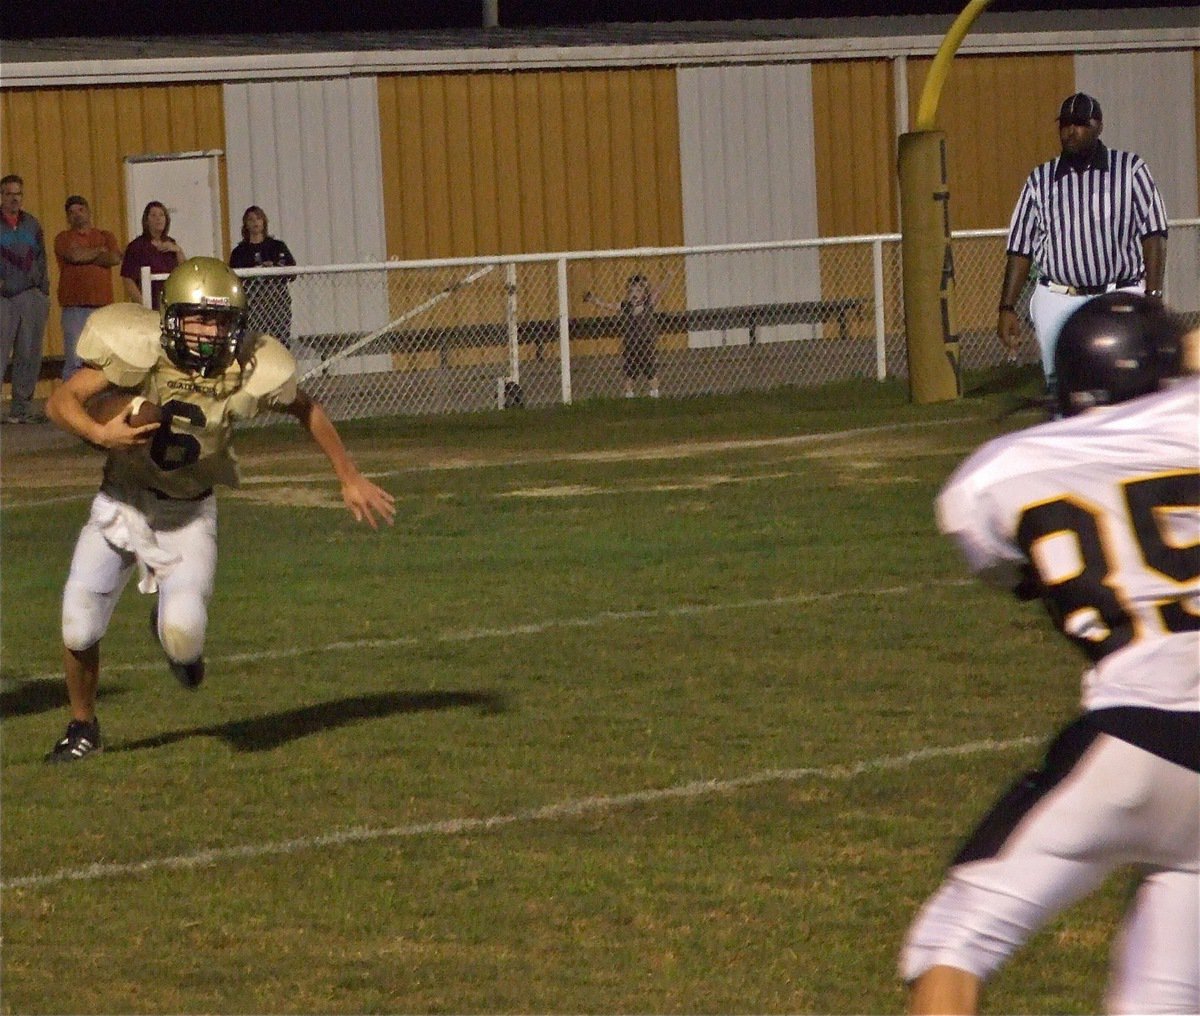 Image: Tony Wooldridge(6) — Tony Wooldridge (6) runs the Gladiators out of trouble and away from their own endzone.